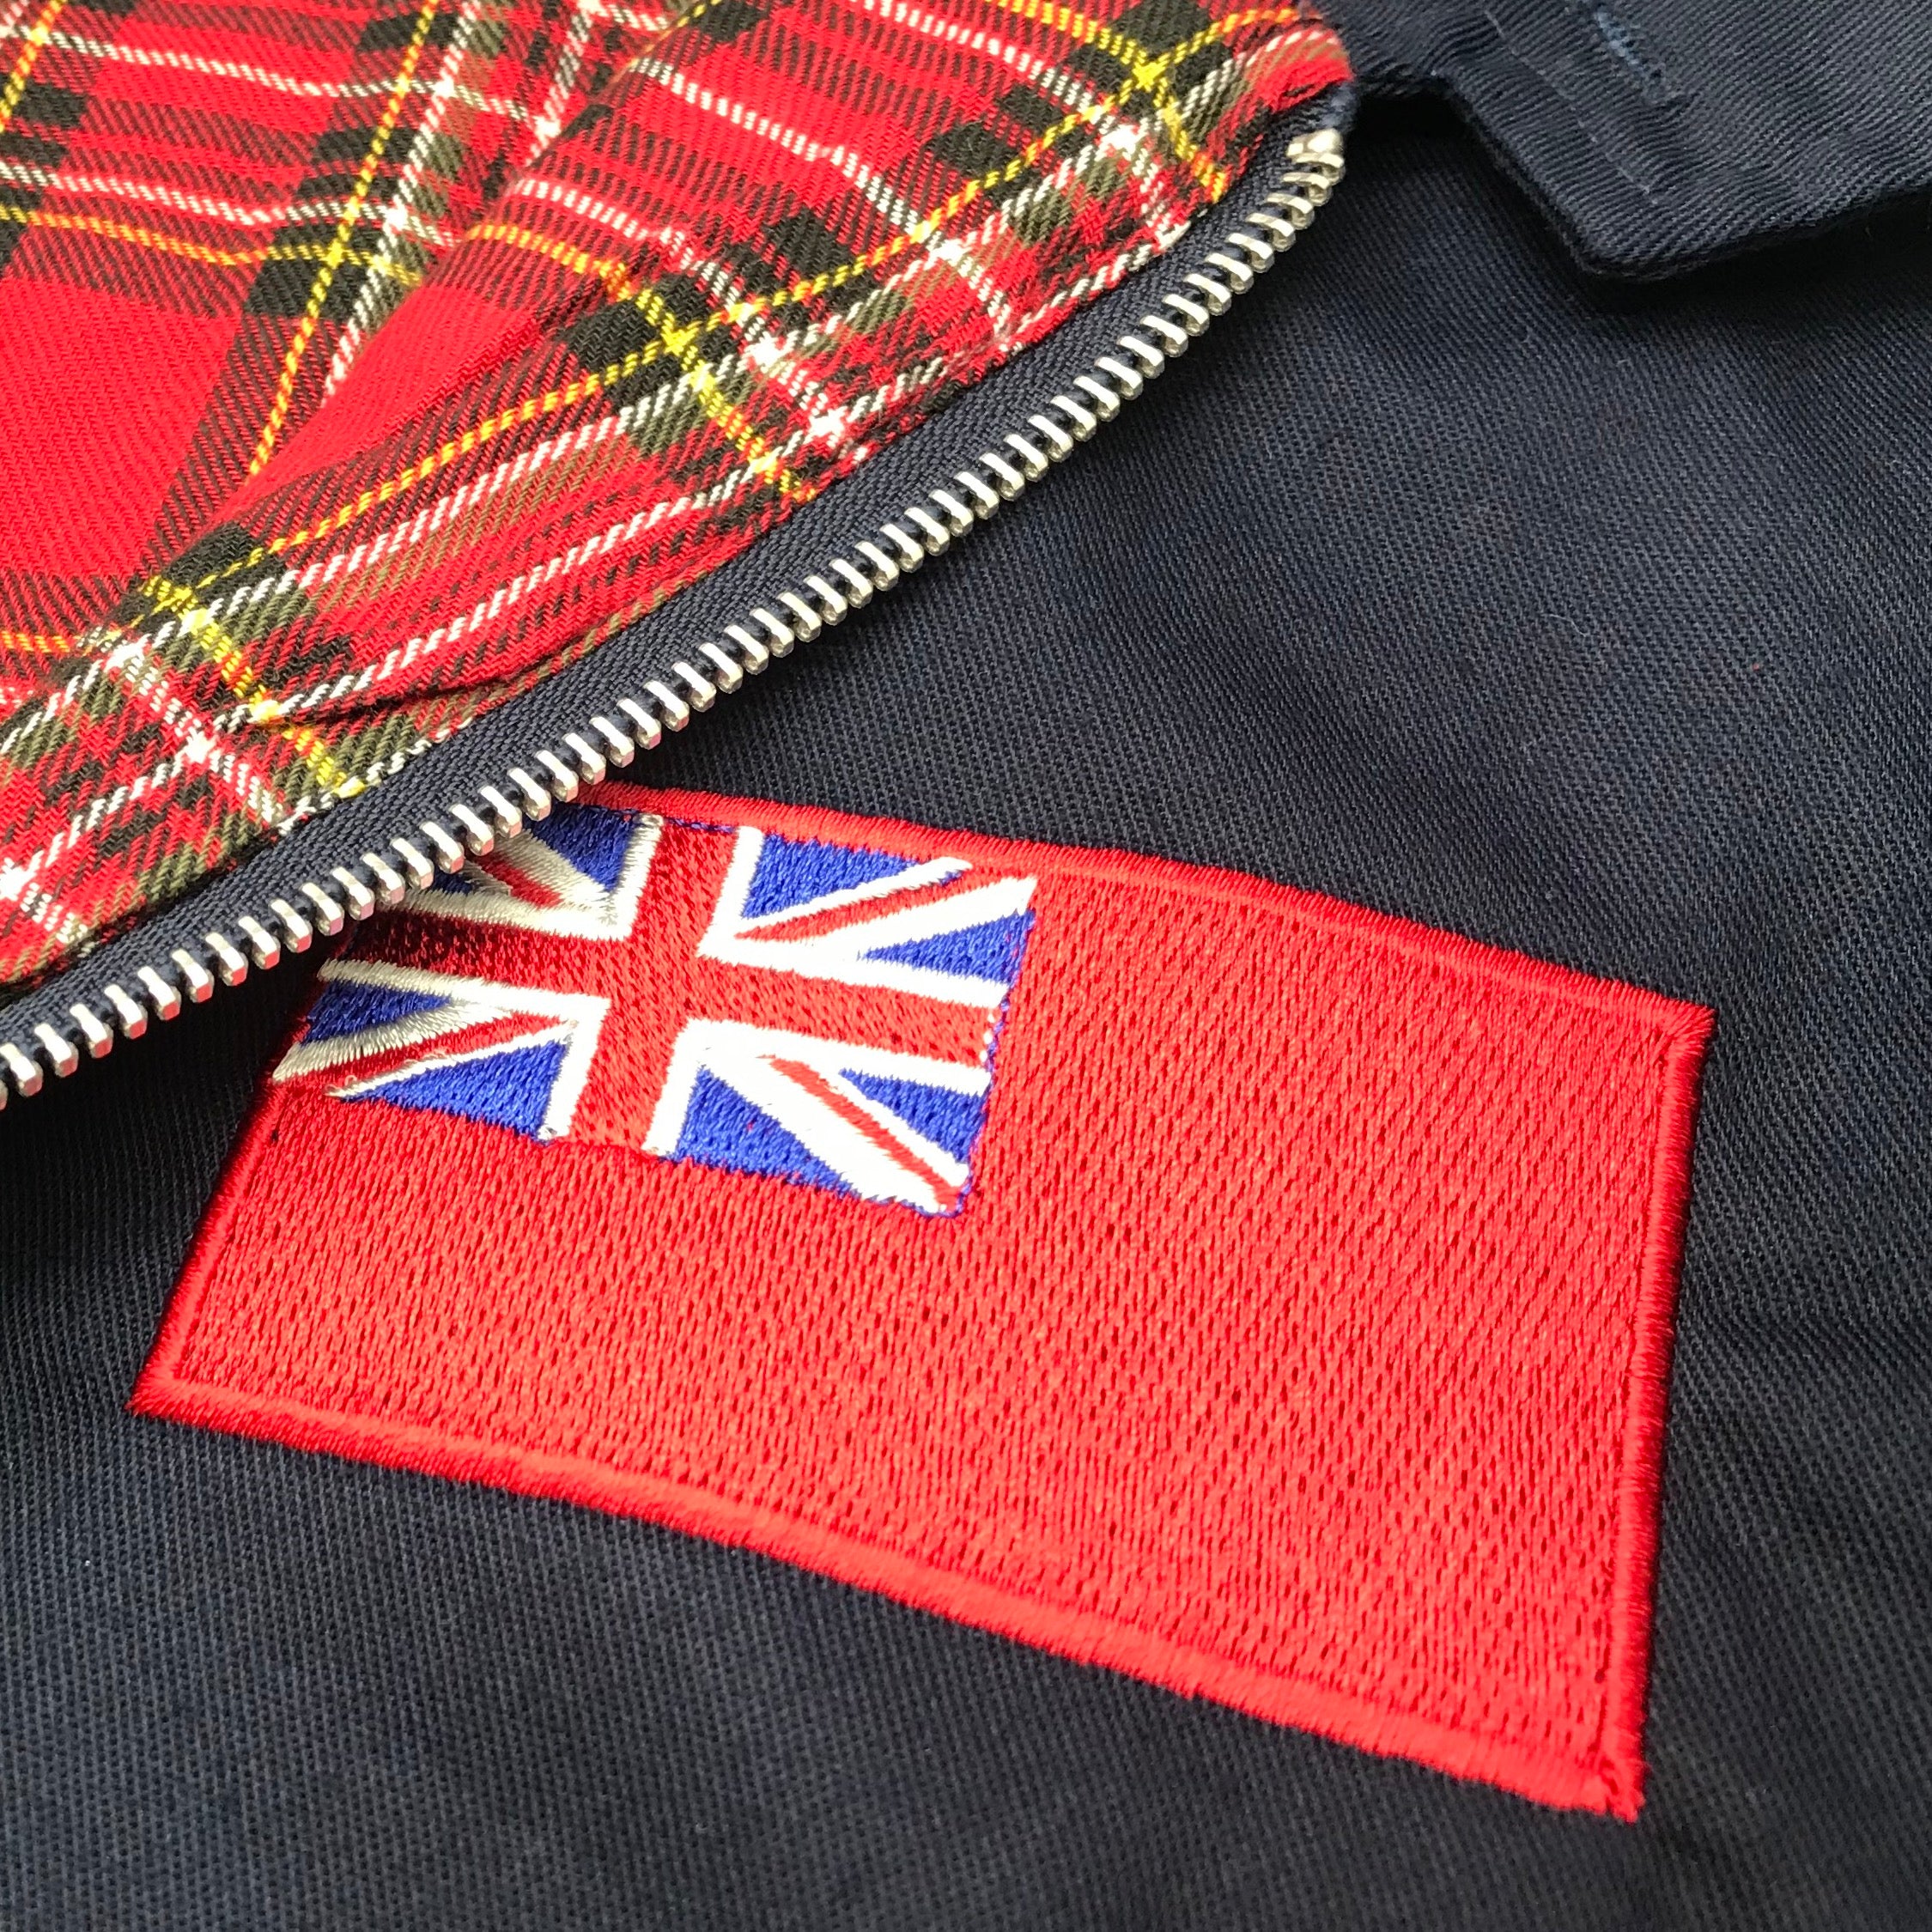 Red Ensign Harrington Jacket | Embroidered Red Ensign Merchandise ...